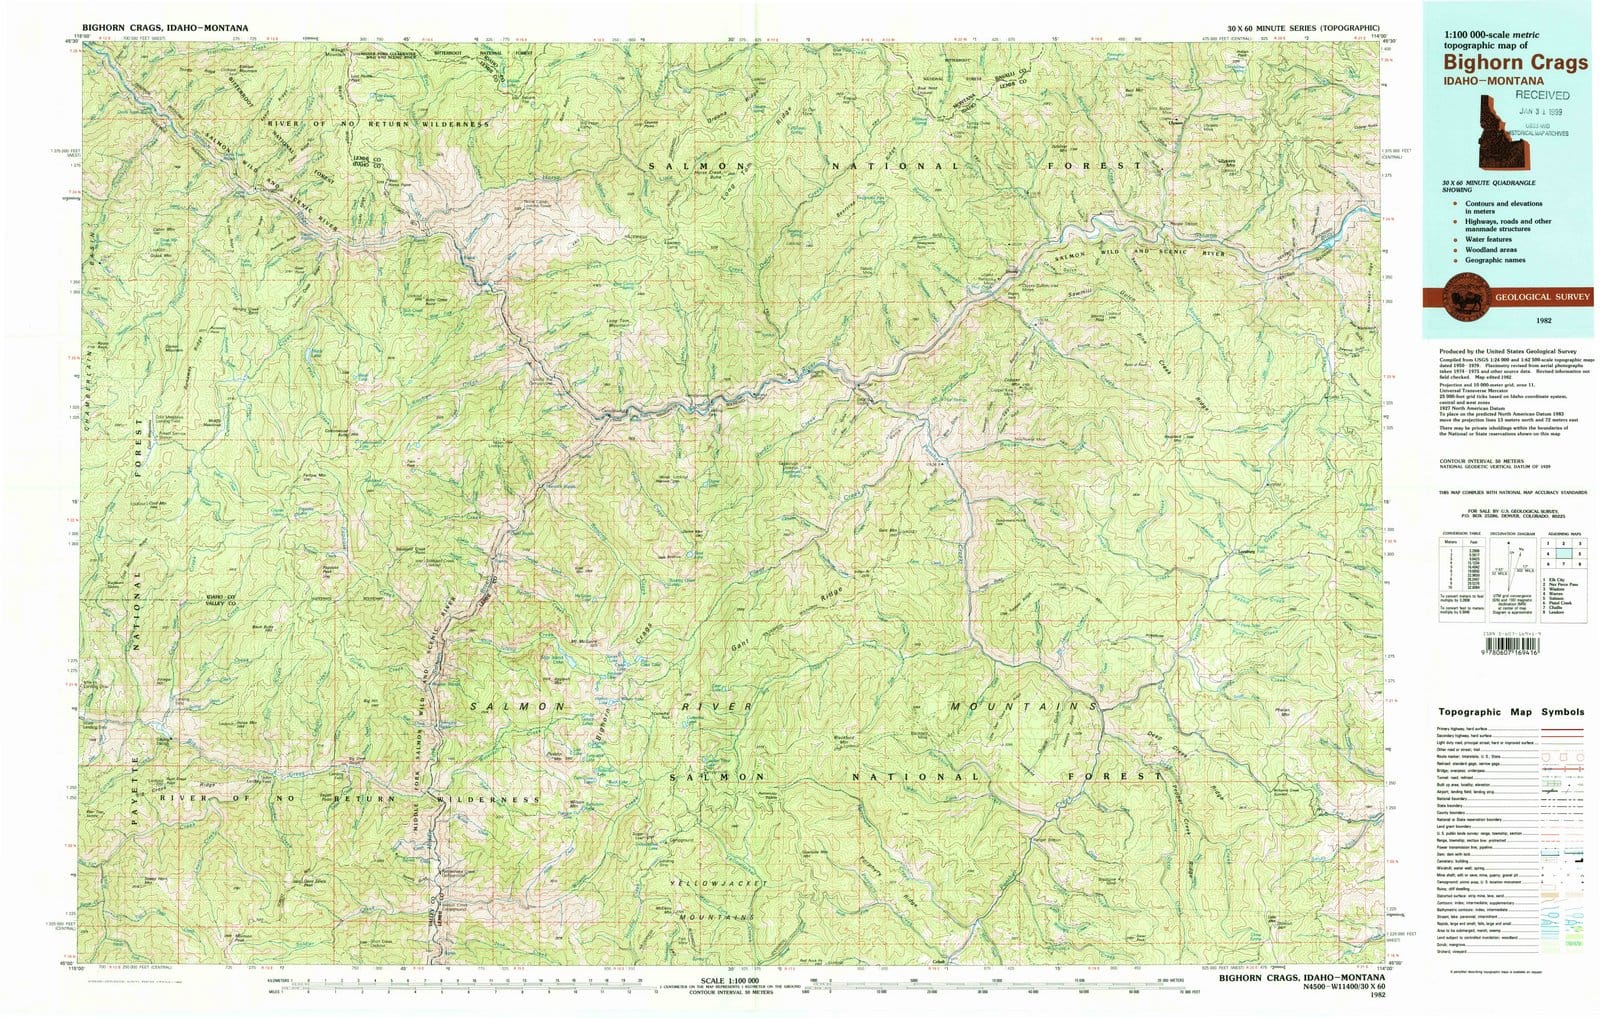 1982 Bighorn Crags, ID - Idaho - USGS Topographic Map